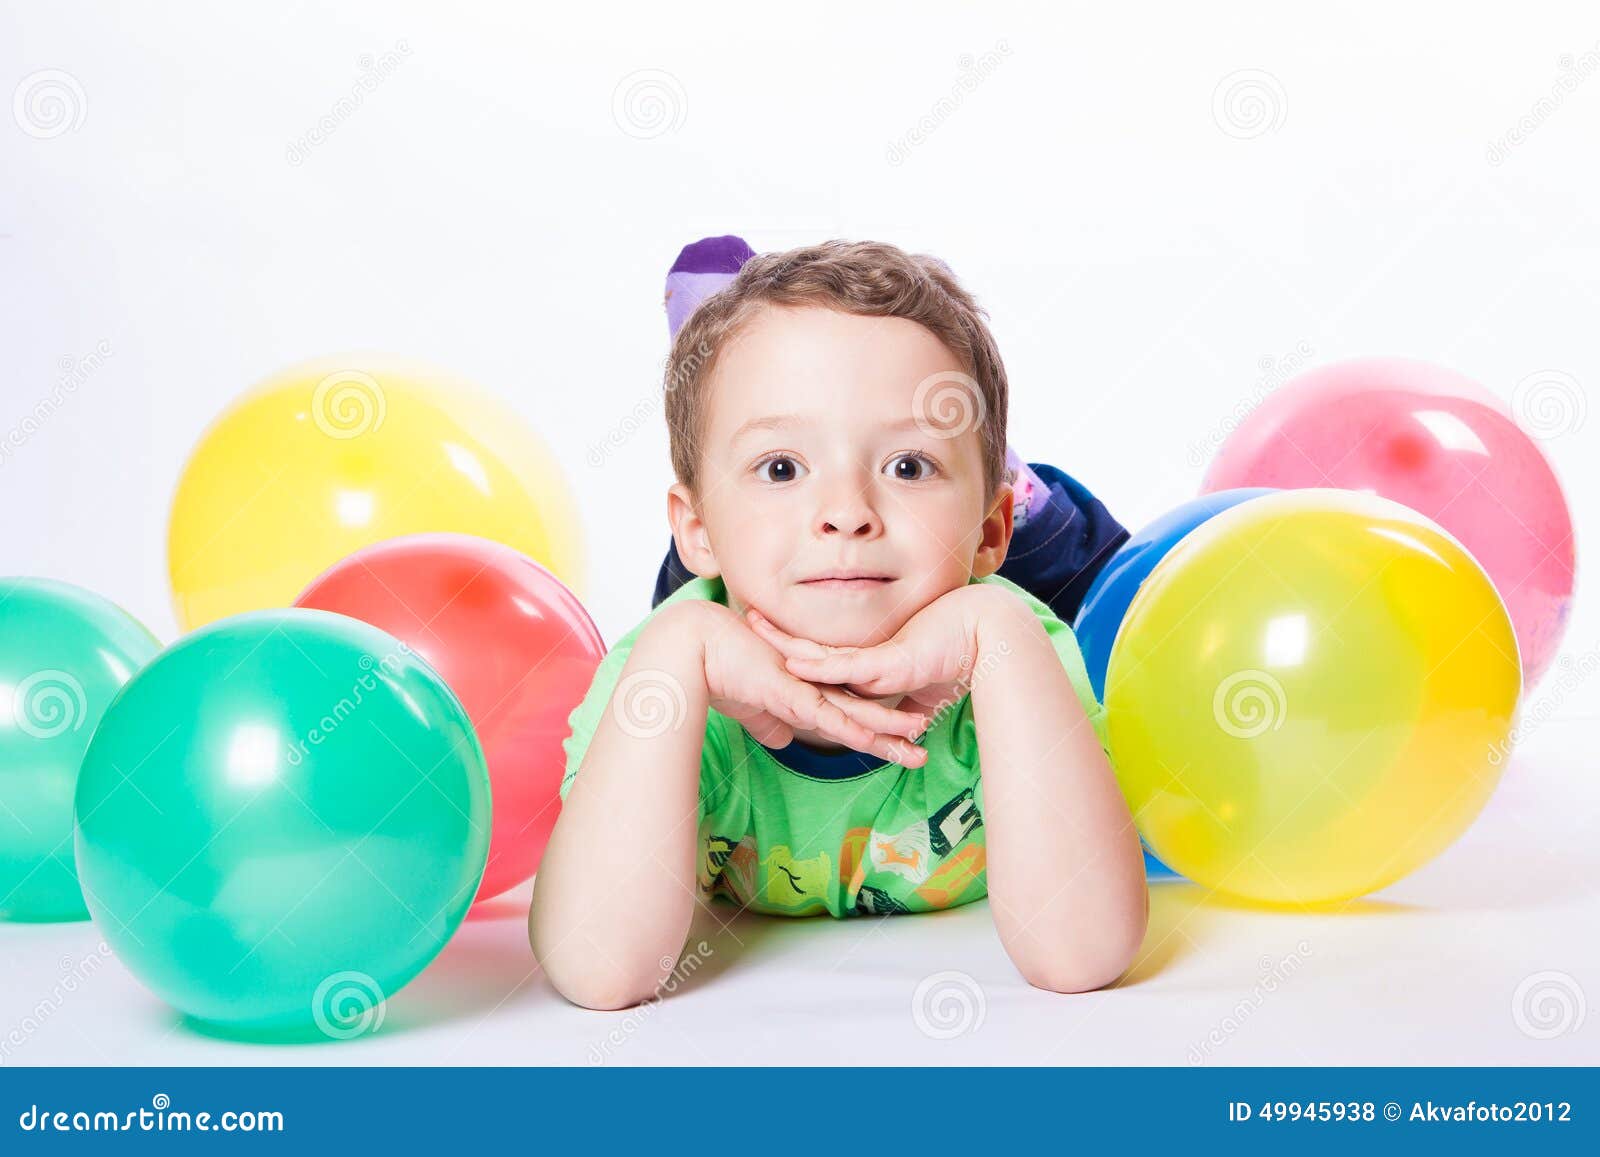 Boy with colorful balloons stock photo. Image of birthday - 49945938